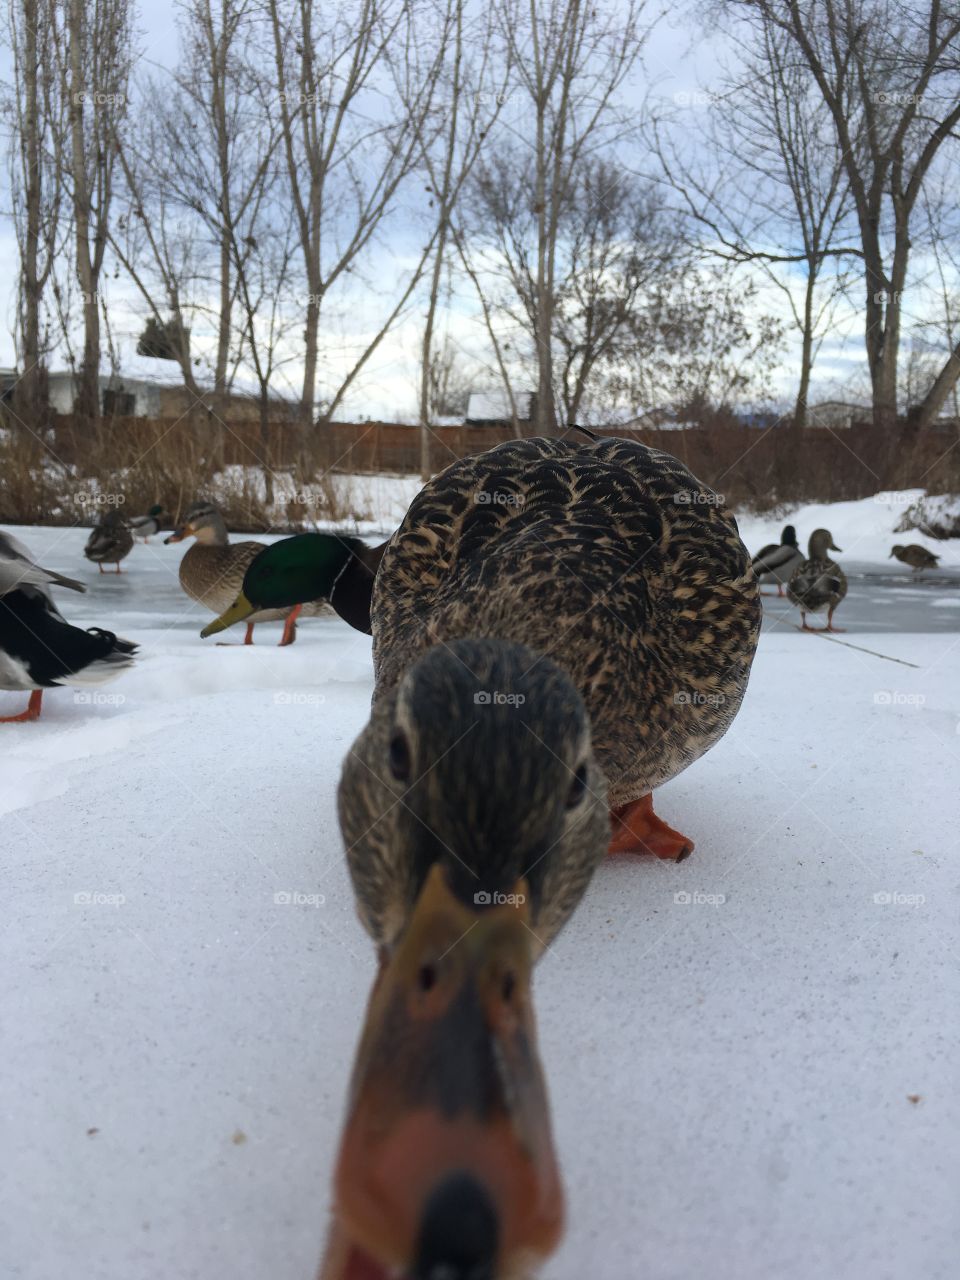 This duck wanted some bird seed